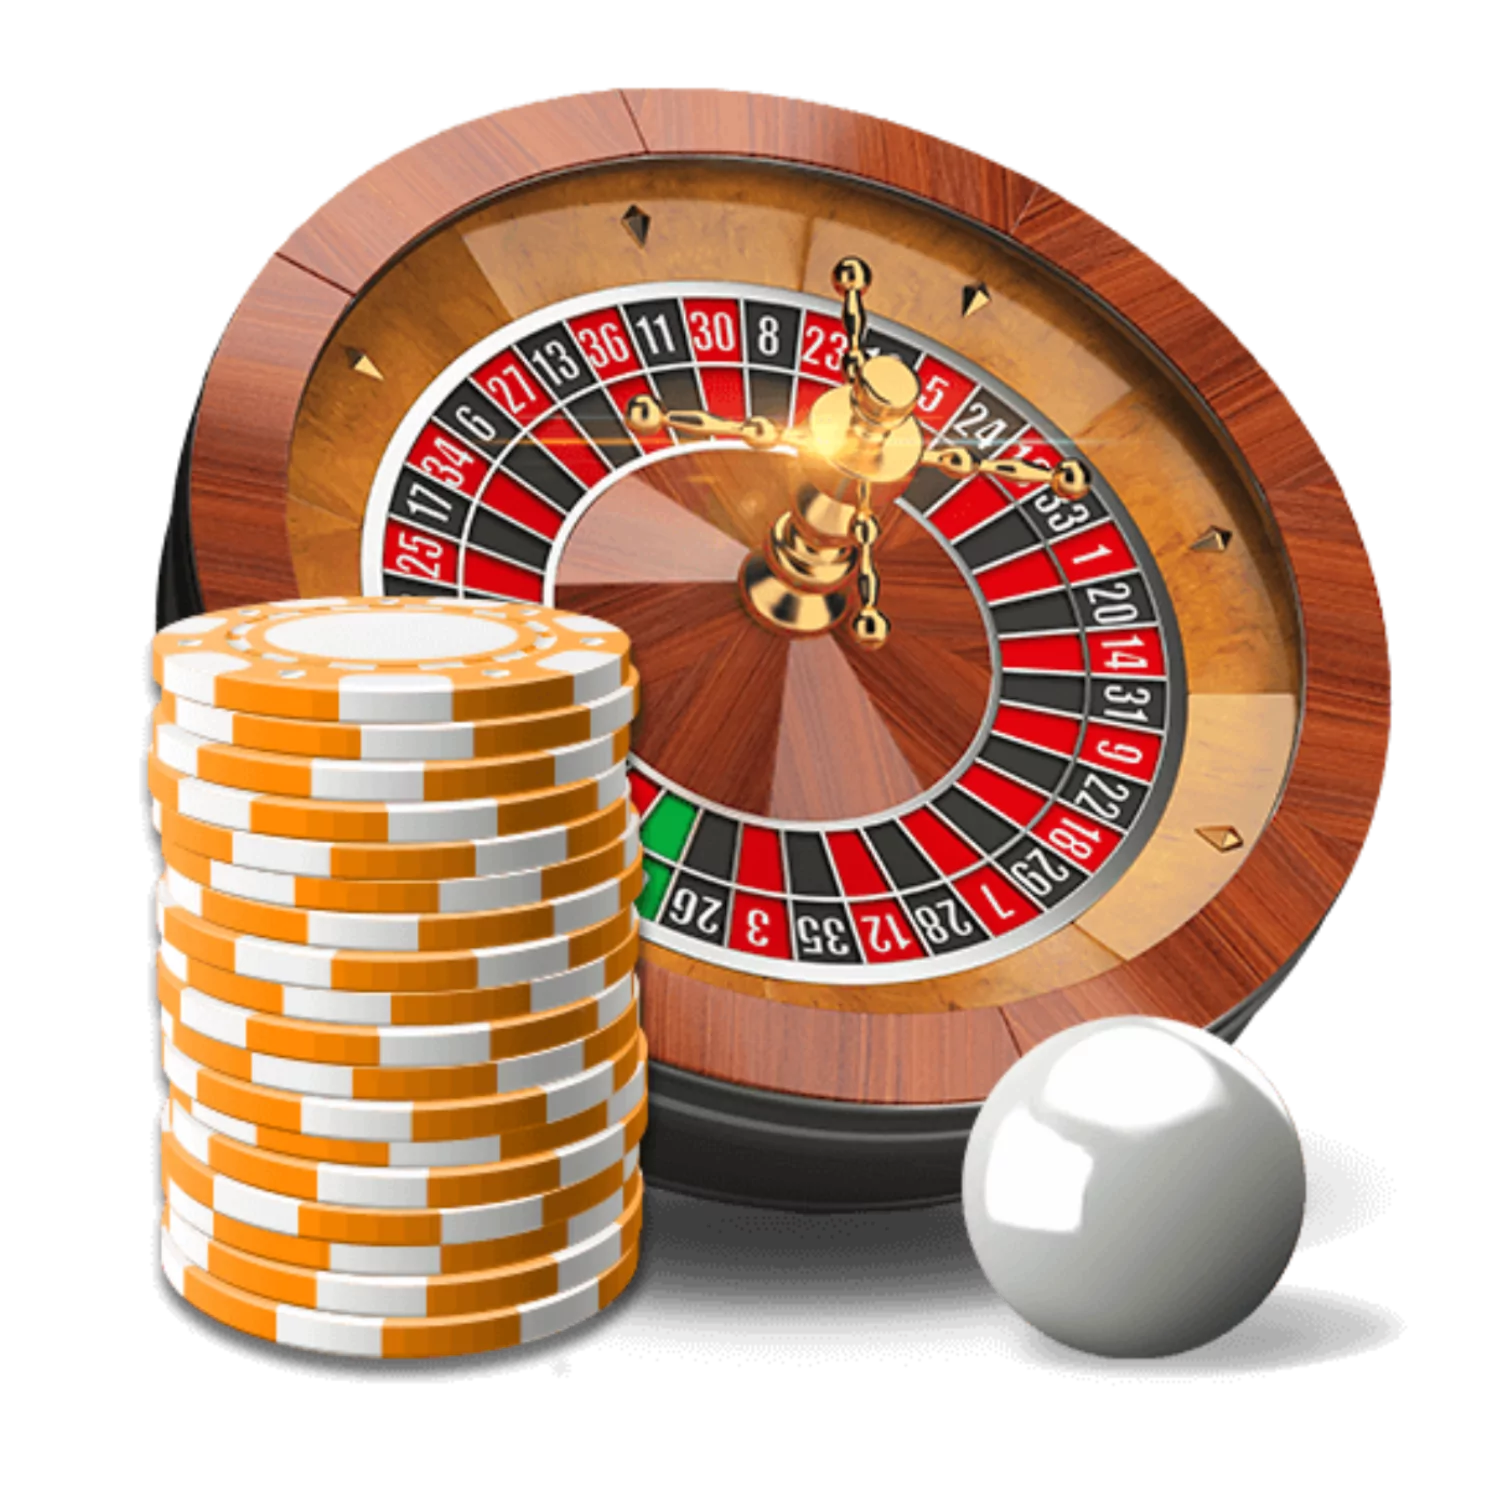 Register at an online casino and play live roulette.